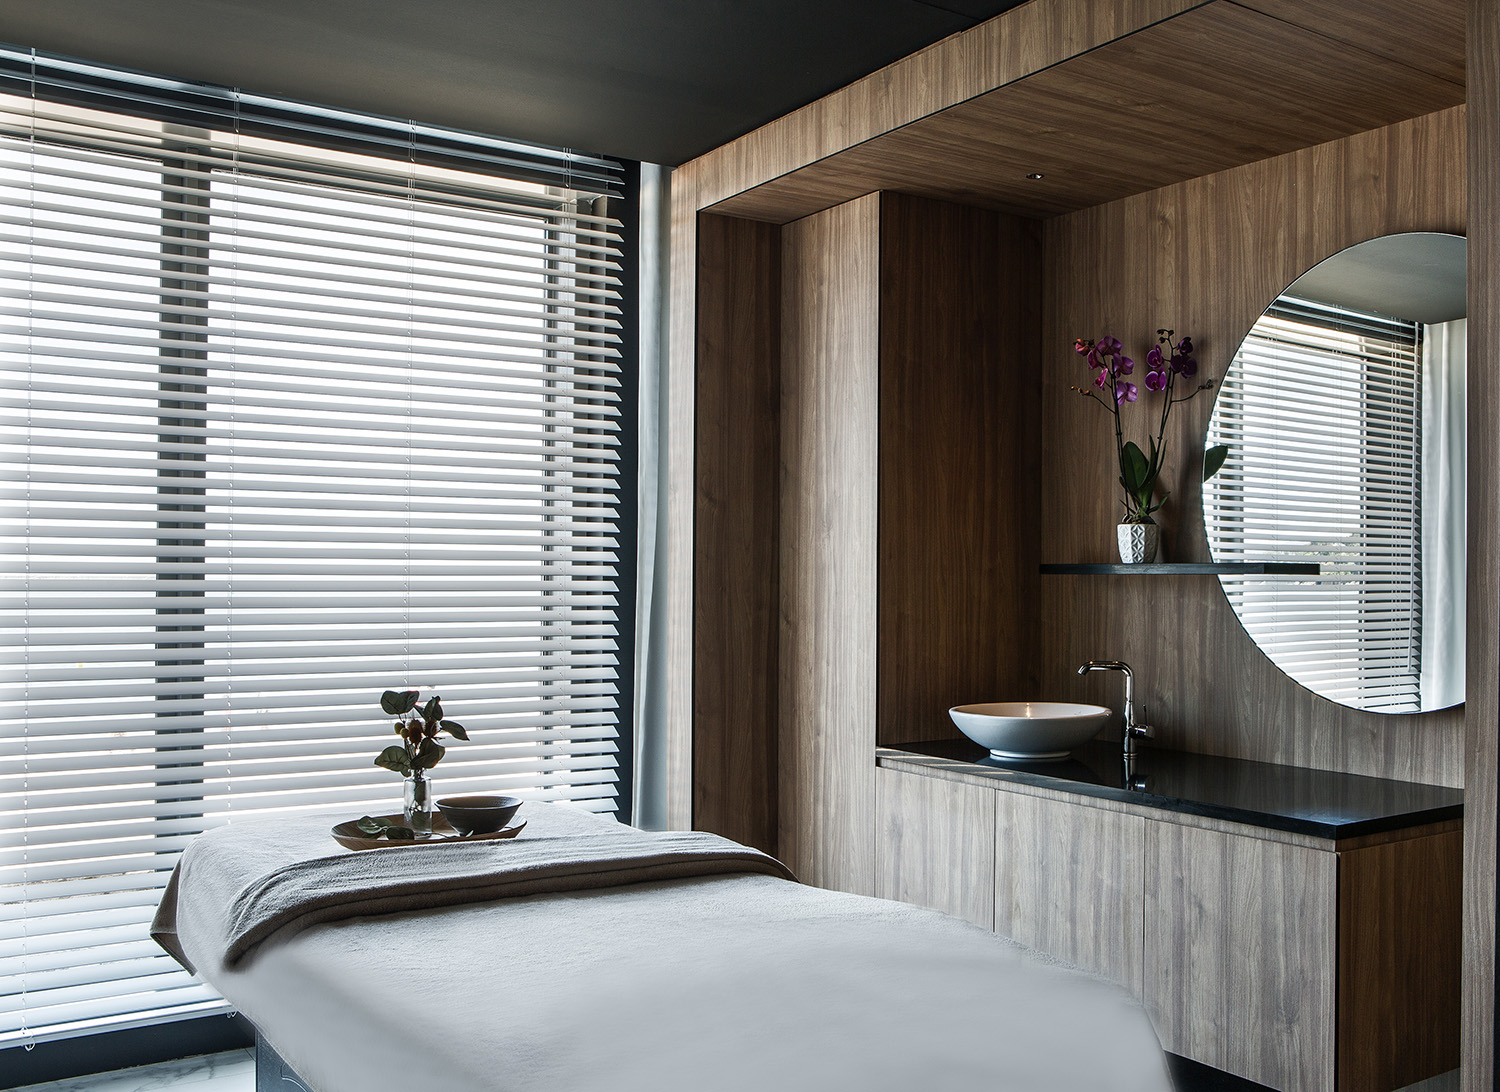 Massage room of the spa of the hotel helianthal Saint-Jean-De-Luz designed by the interior design studio jean-philippe nuel, with a view of the sea, dream thalasso, pure design, sober and chic decoration